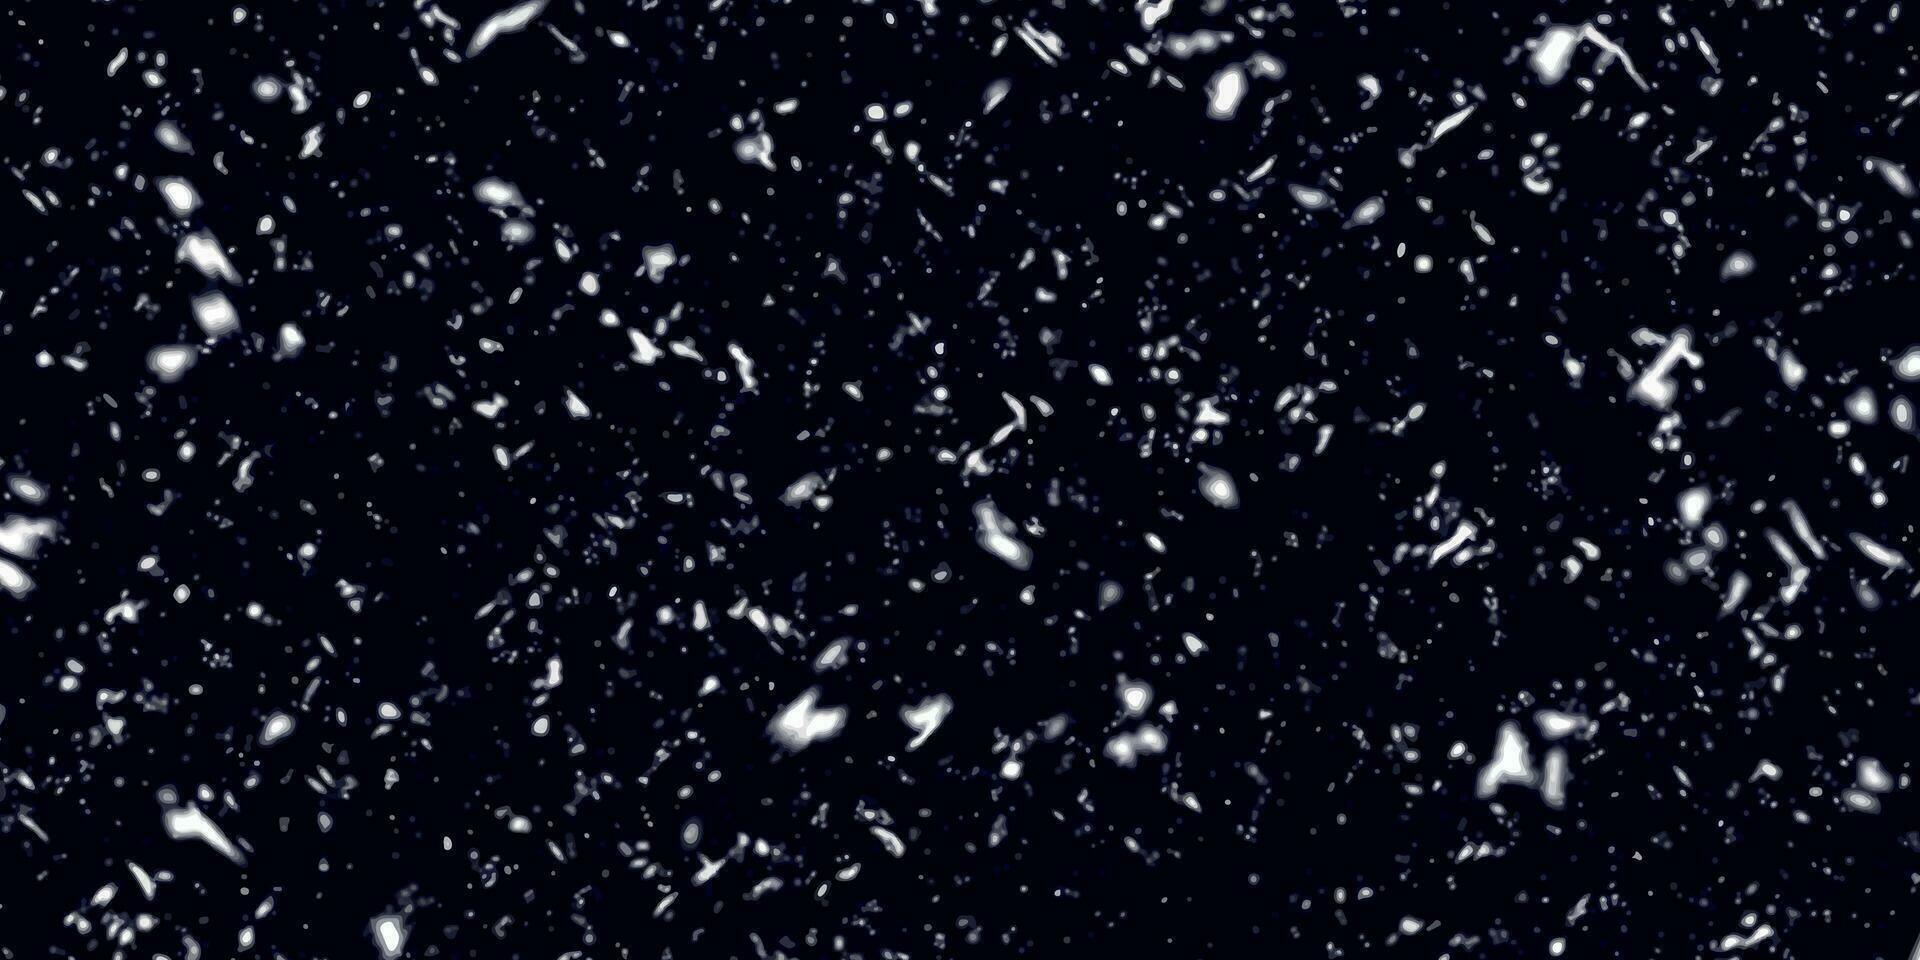 Realistic Falling Snow or Snowflakes. Bokeh Lights on Black Background, Flying Snowflakes in the Air. Many Snowflakes in Flying in the Air. Winter Night Snowfall and Blizzard of Snow At. vector